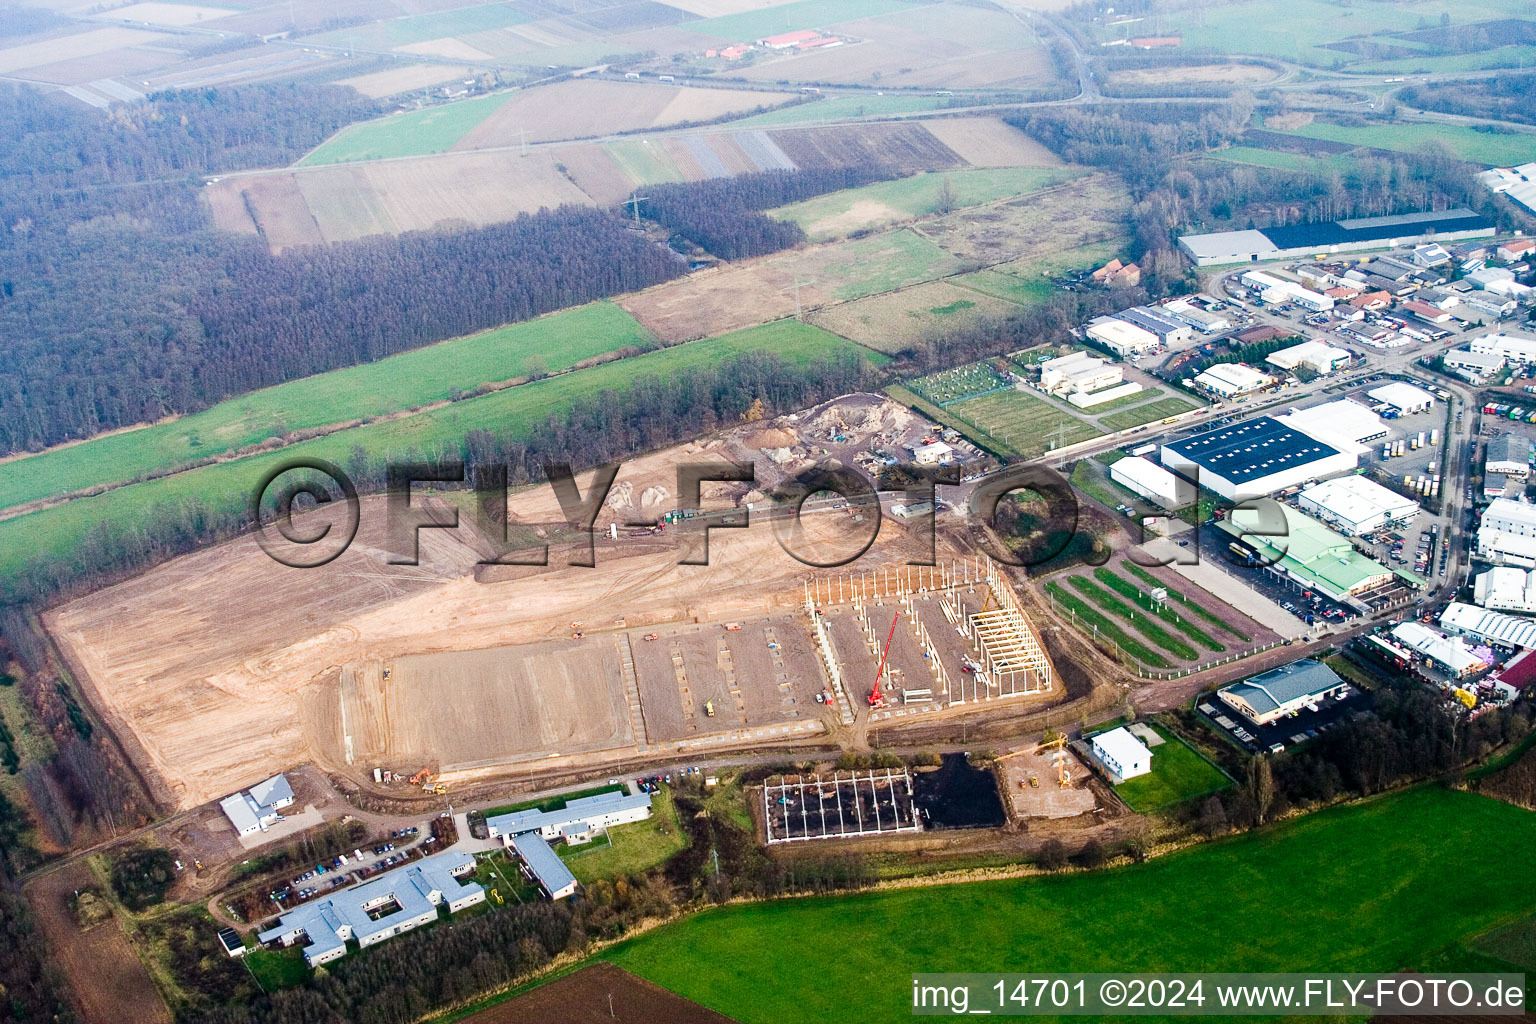 Aerial view of New building construction site in the industrial park Horst for Friedrich Zufall GmbH & Co. KG Internationale Spedition in the district Gewerbegebiet Horst in Kandel in the state Rhineland-Palatinate, Germany